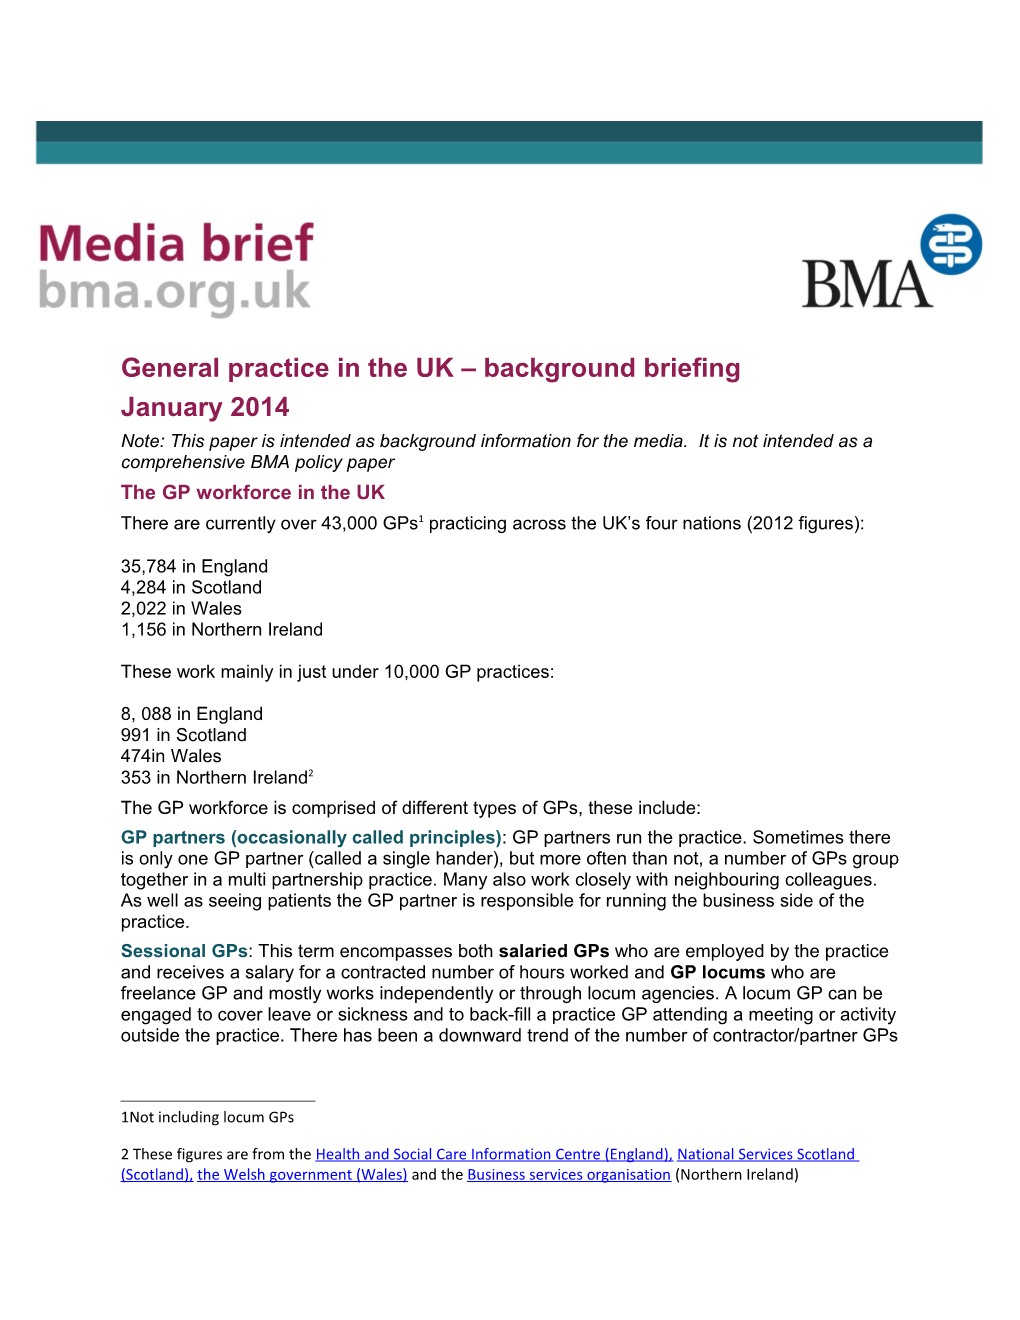 General Practice in the UK Background Briefing